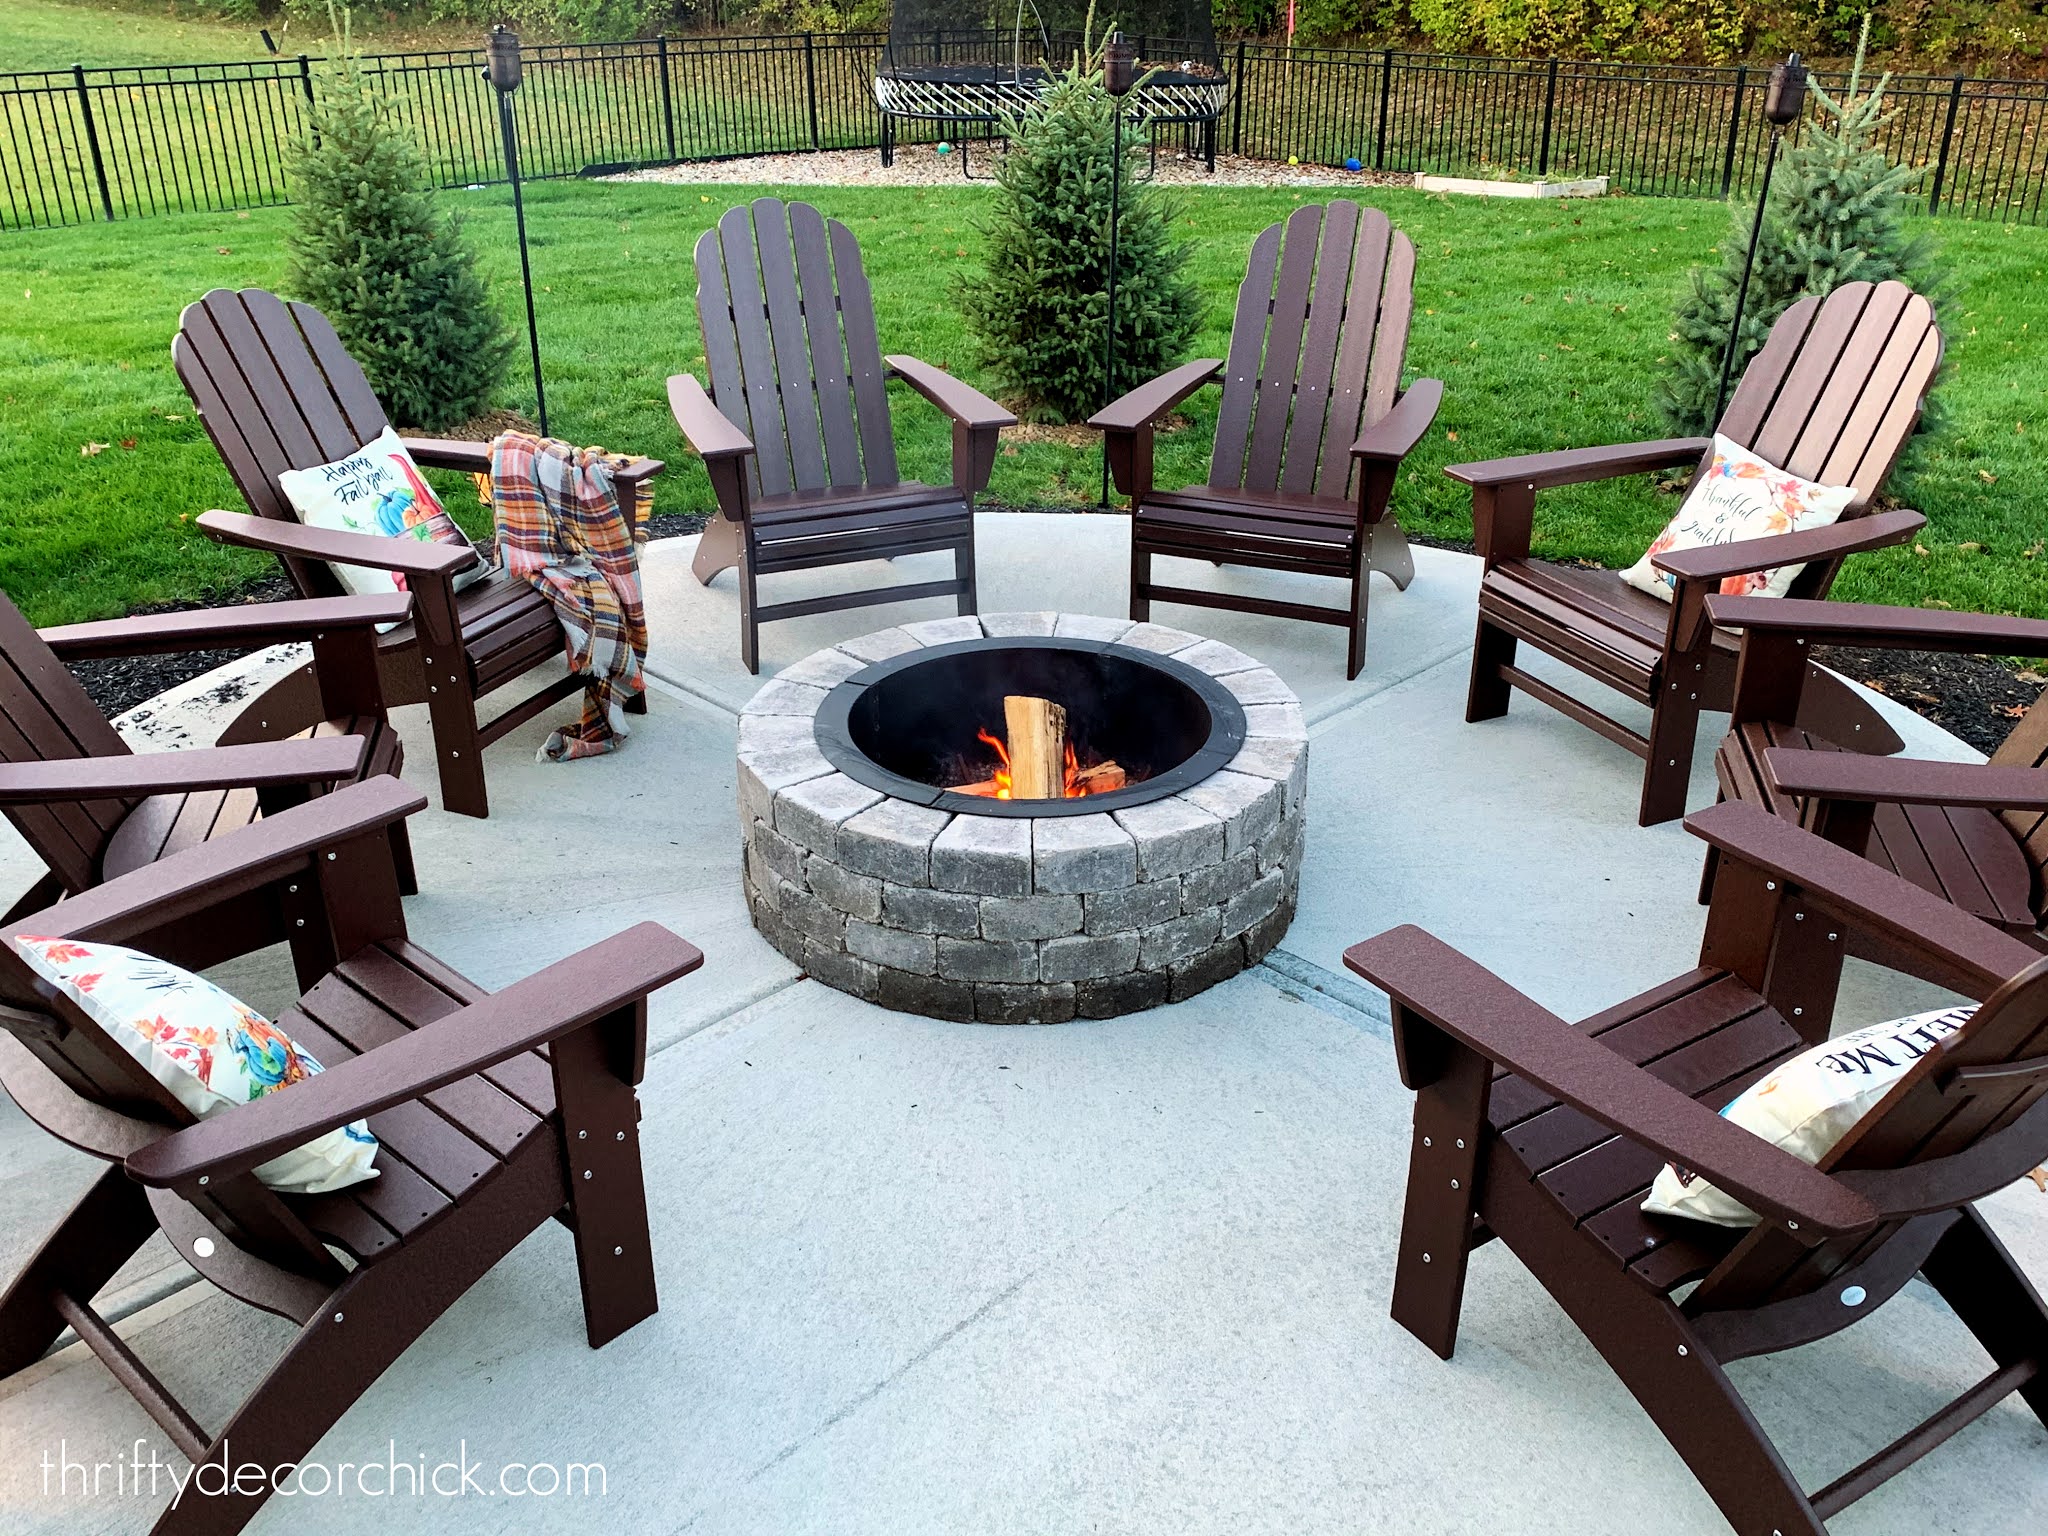 Our Cozy Round Patio Fire Pit With New, Outside Furniture With Fire Pit